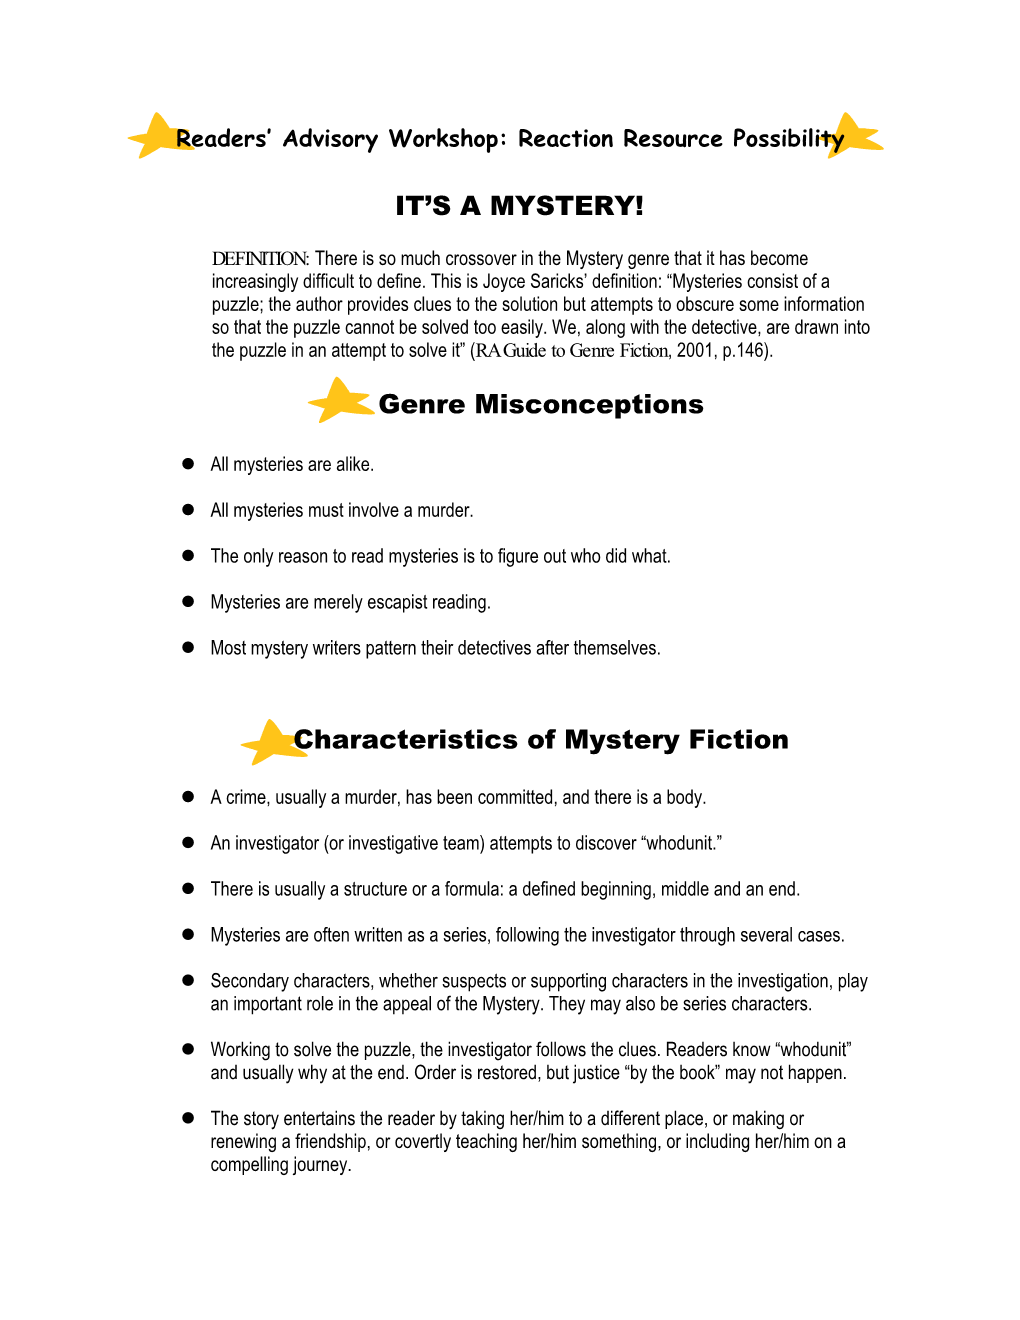 Genre Misconceptions Characteristics of Mystery Fiction